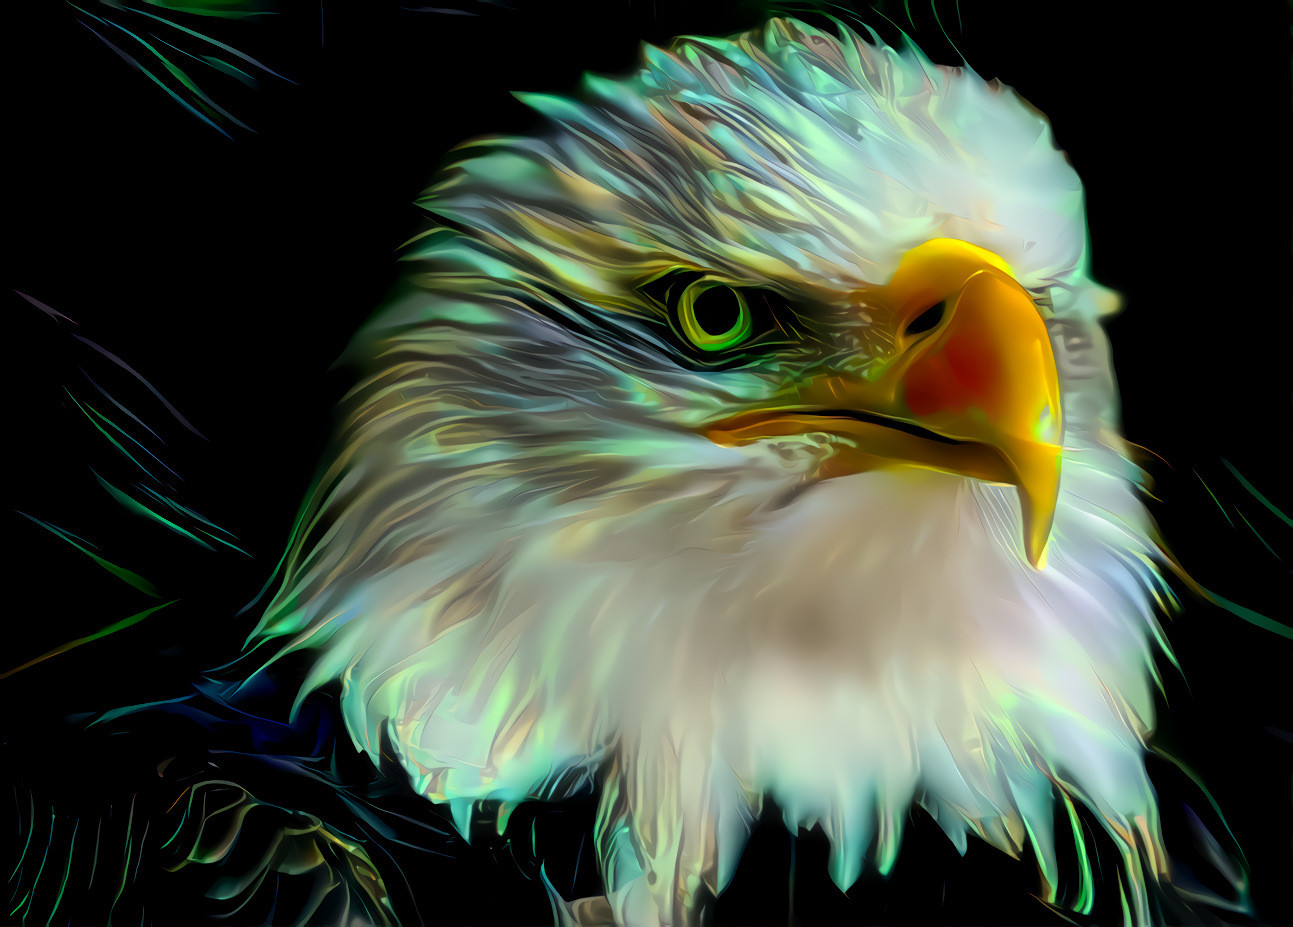 animal project - Eagle absctrat